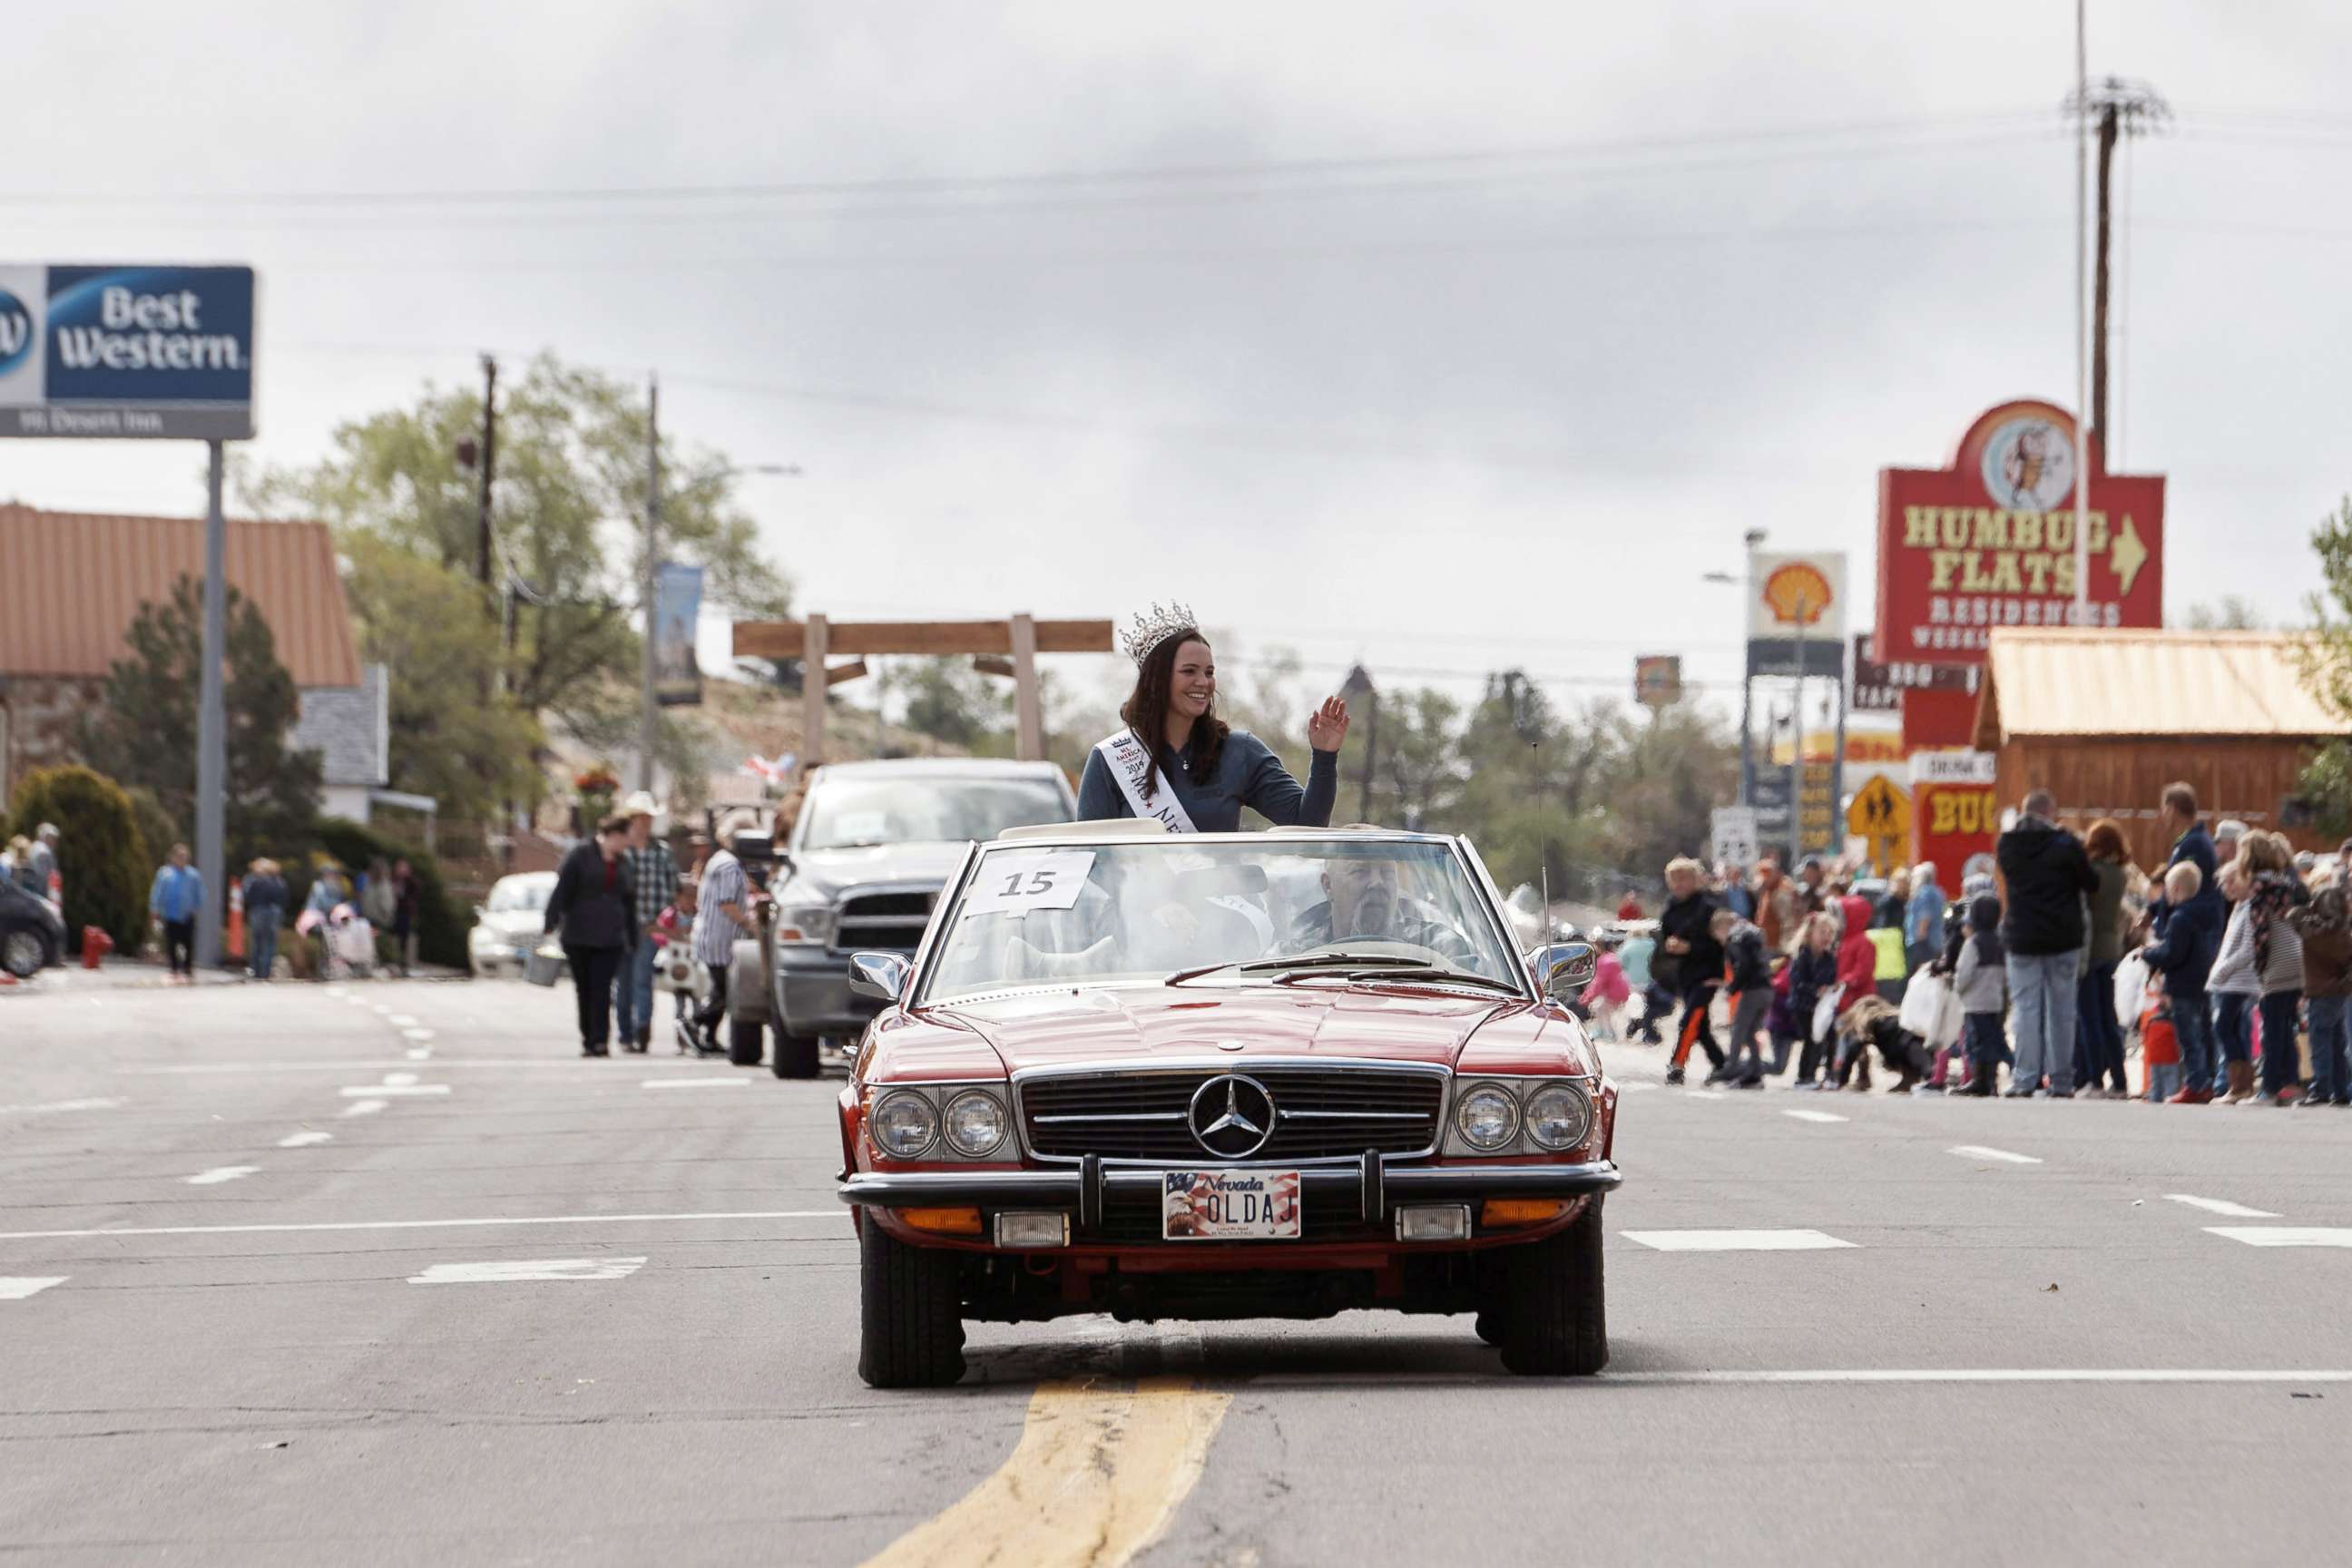 PHOTO: In this May 25, 2019, file photo, Ms. Nevada State Katie Williams waves from a car during a parade in Tonopah, Nevada.